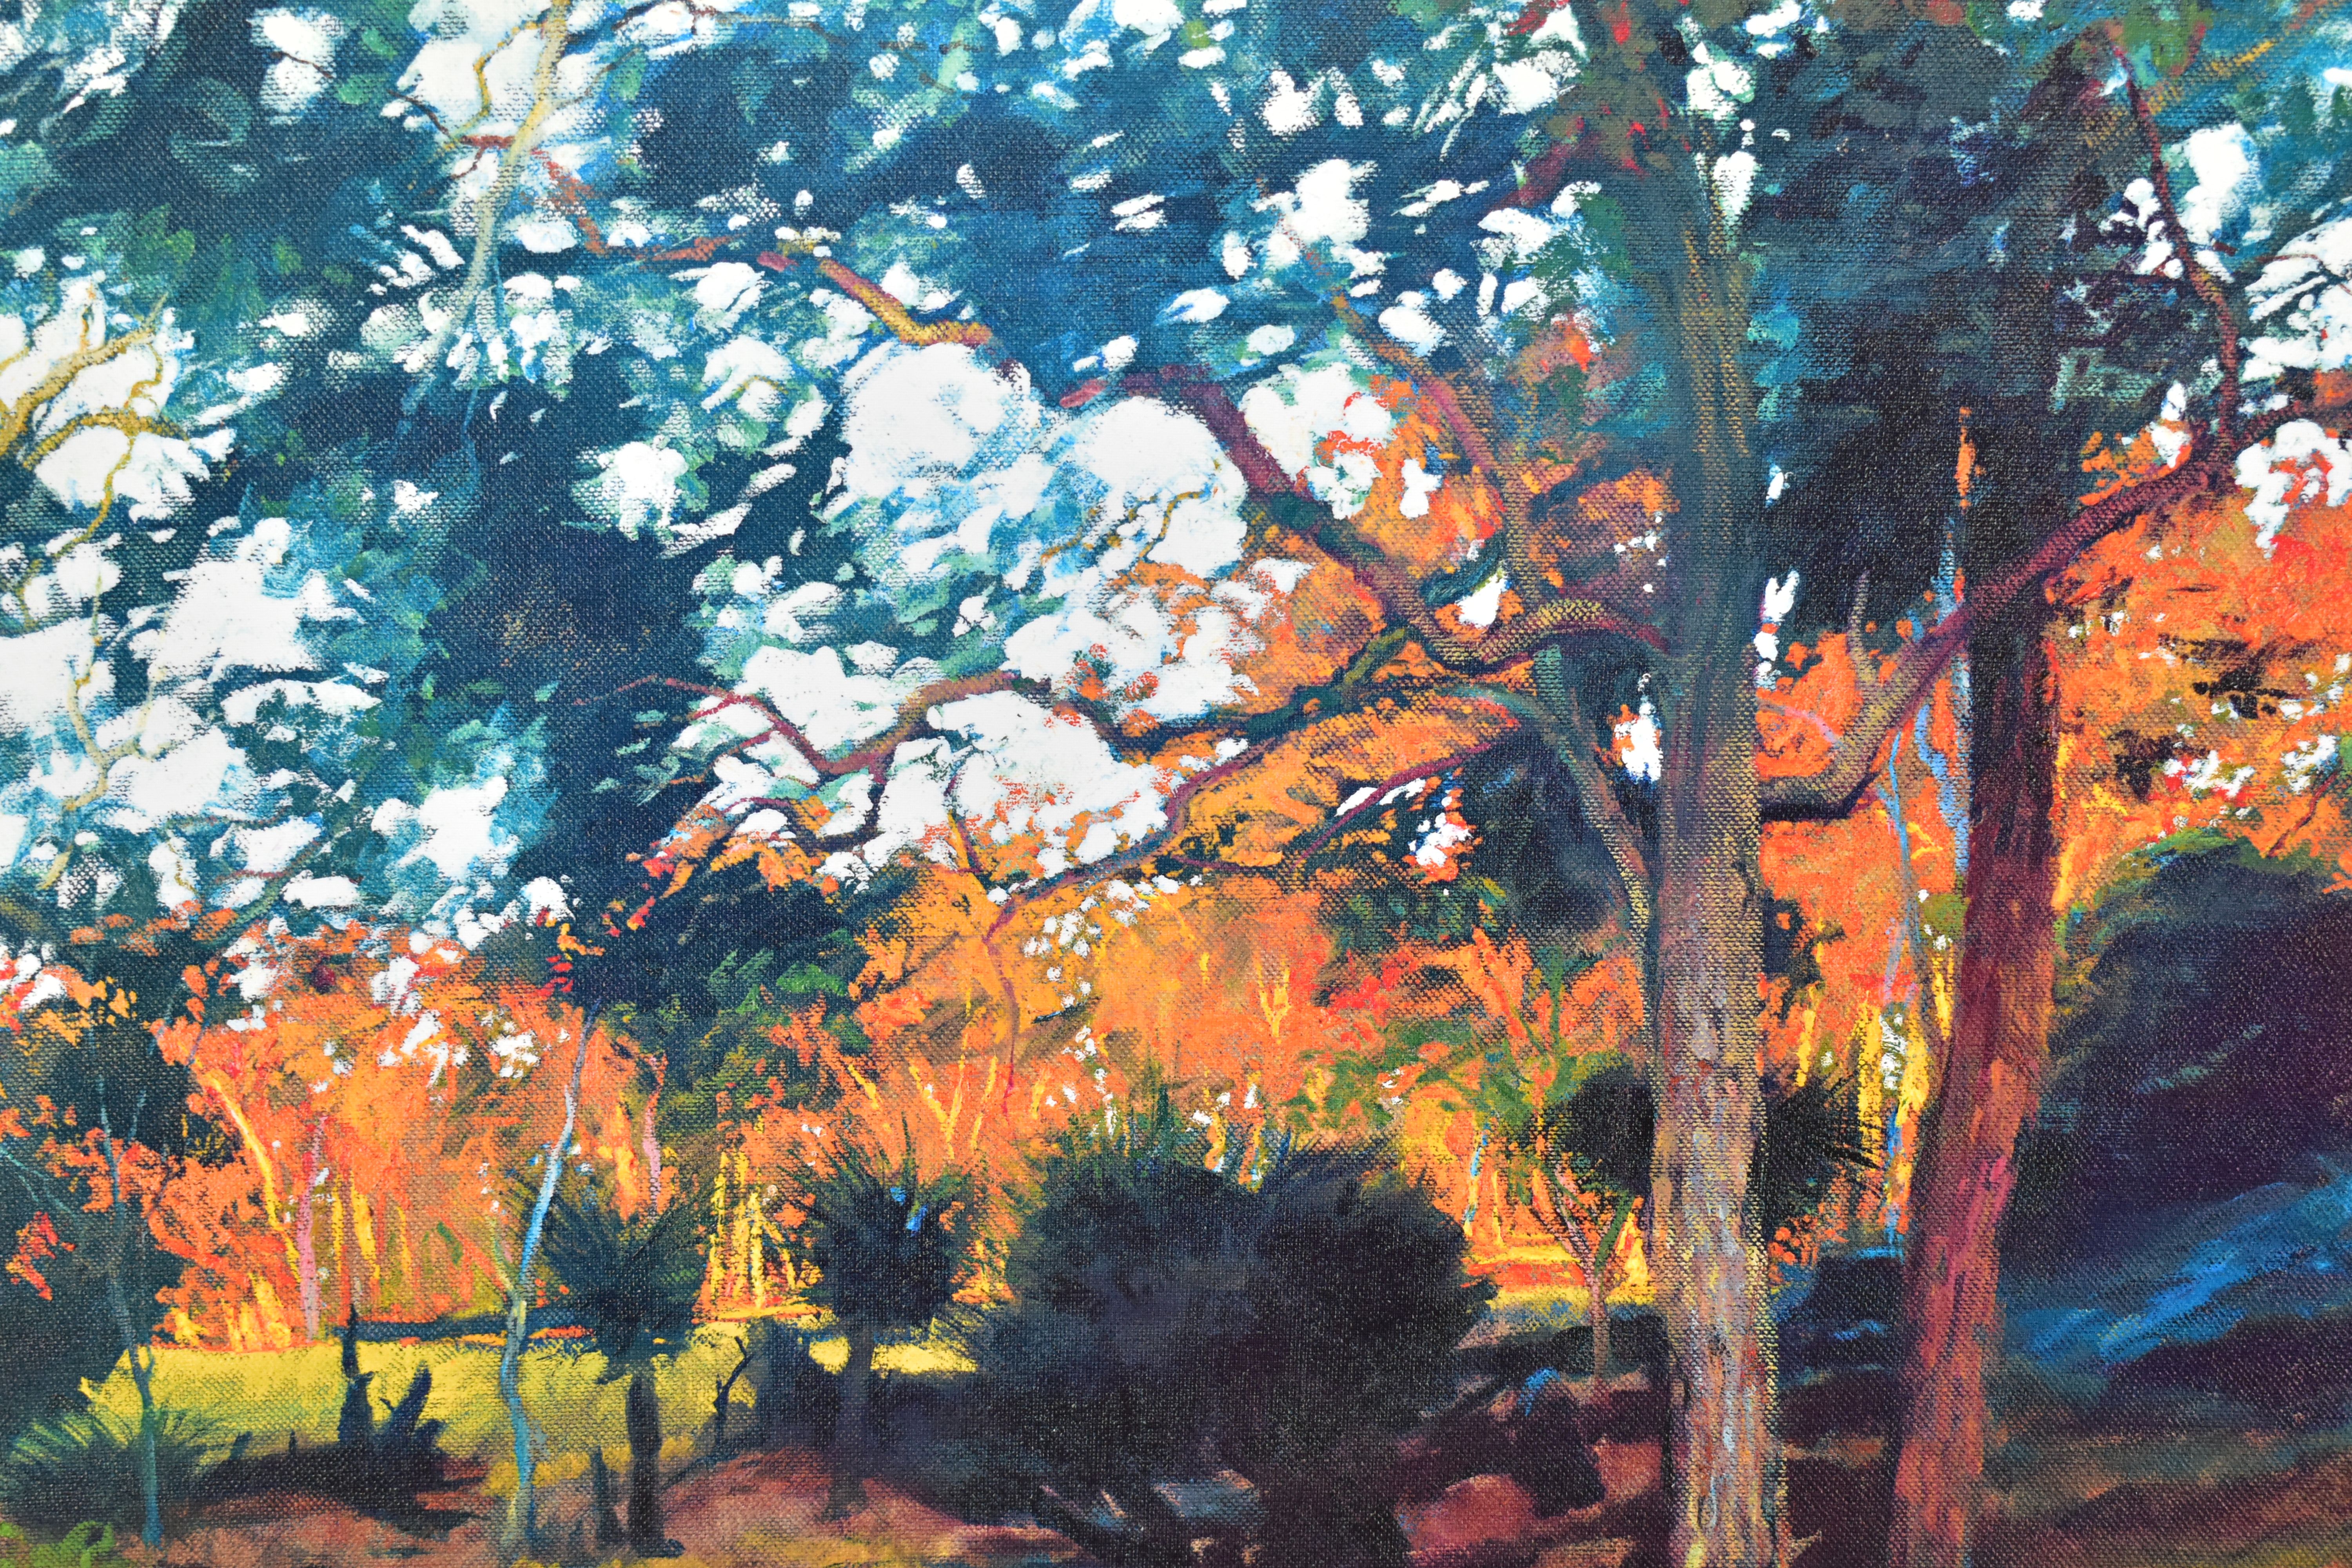 ROLF HARRIS (AUSTRALIA 1939) ' BUSH SUNSET', a signed limited edition print depicting an - Image 2 of 8